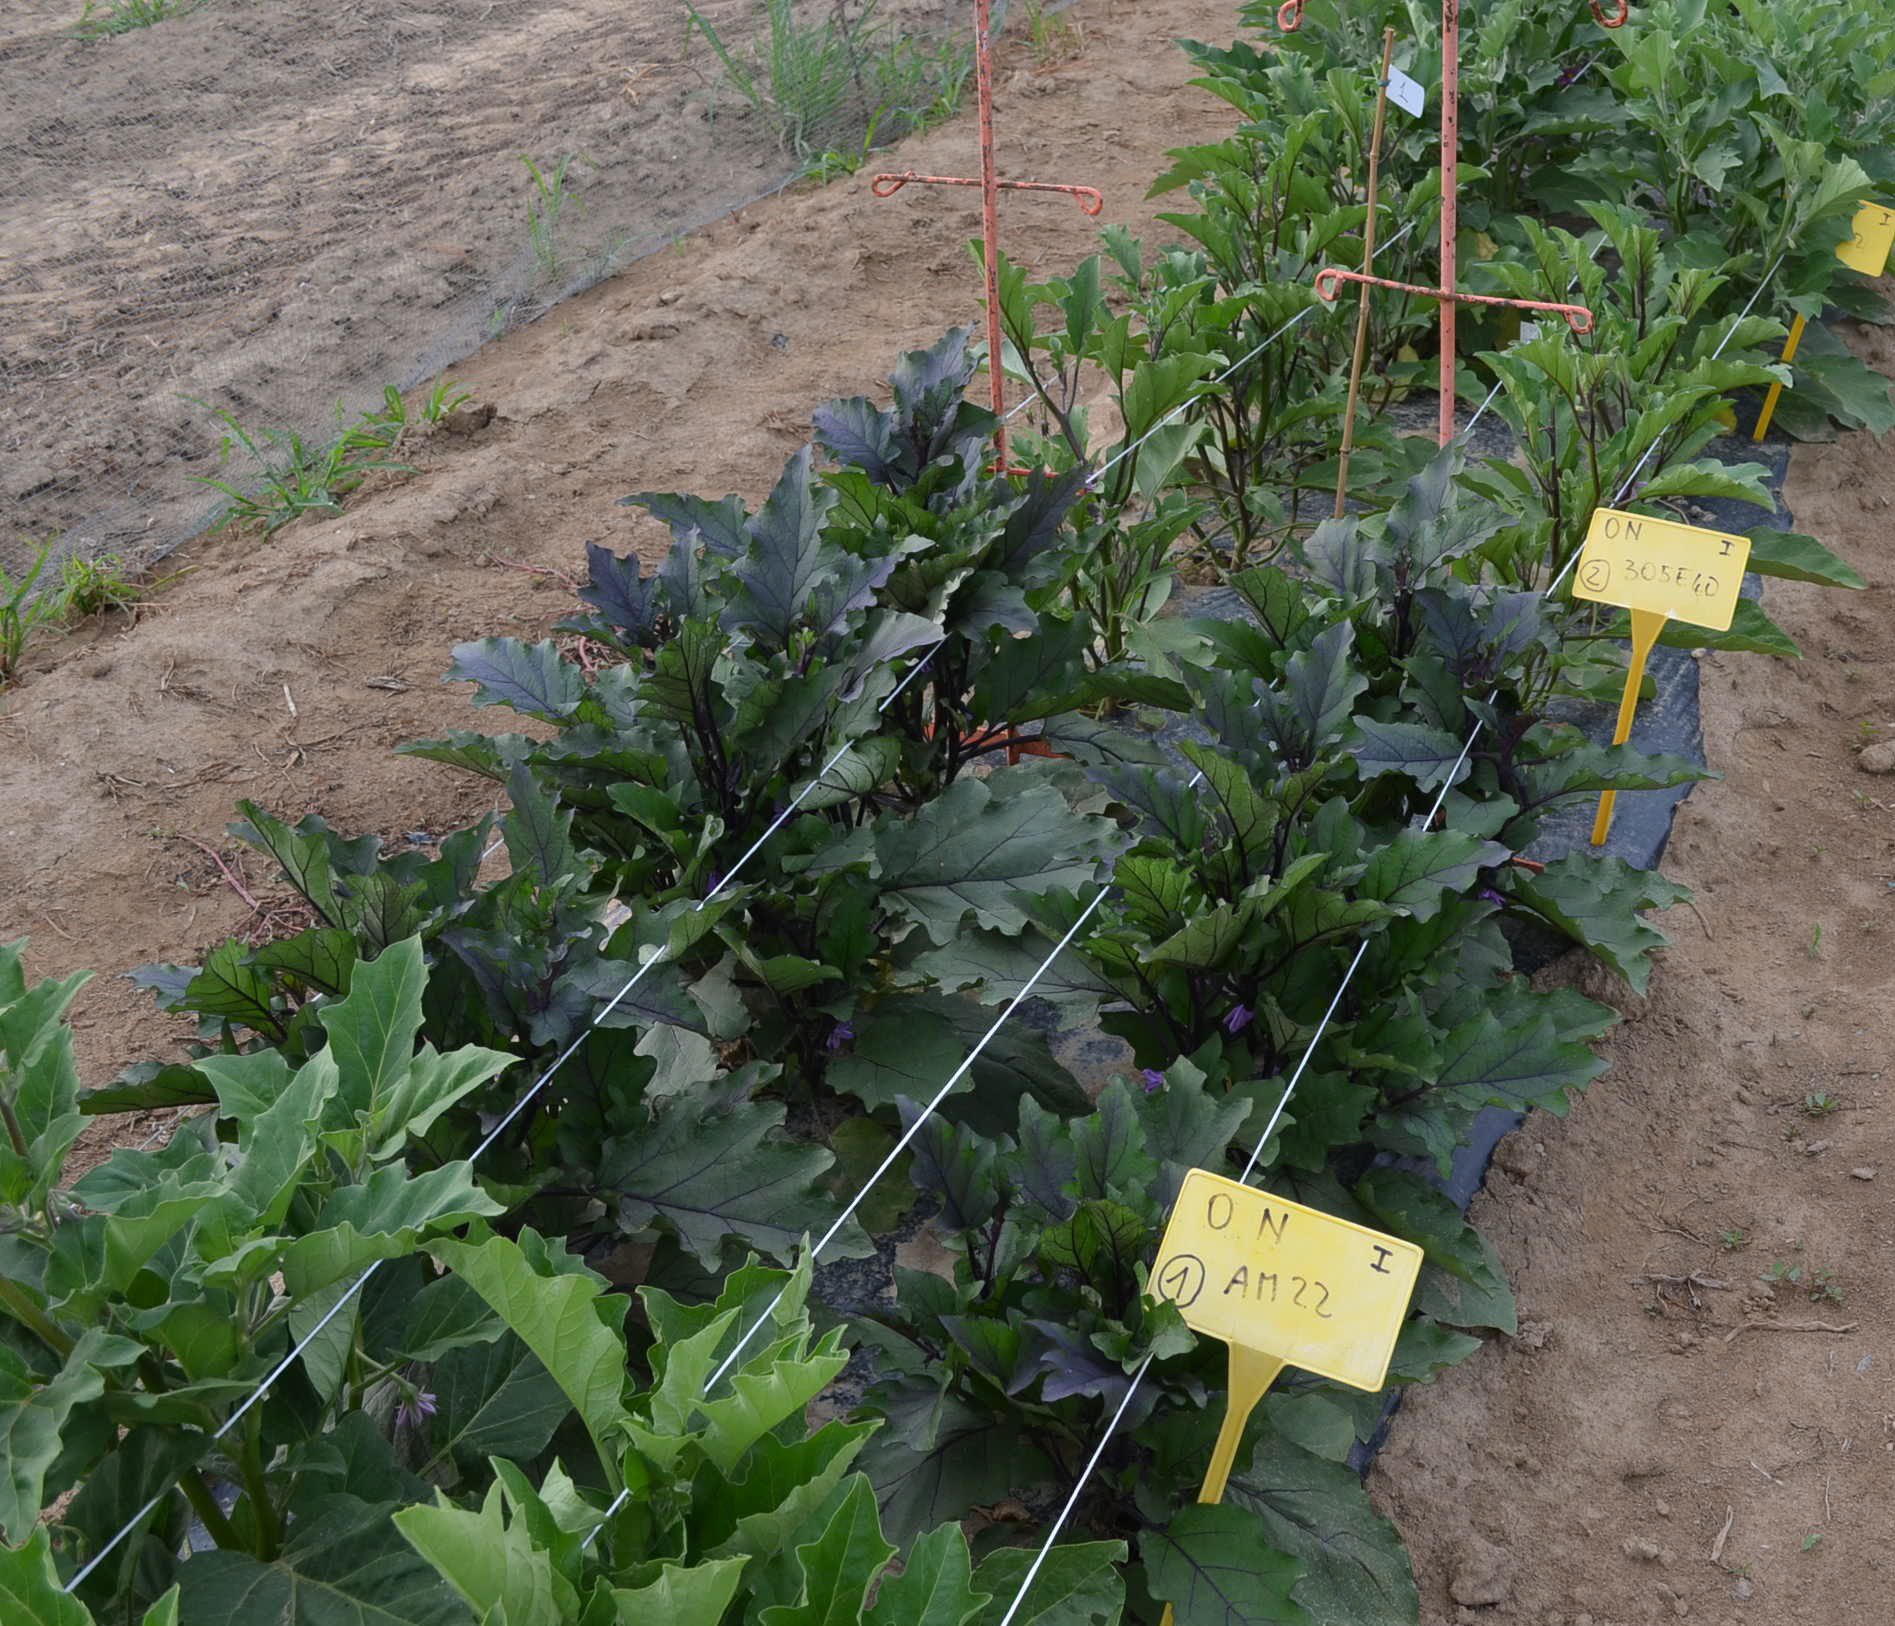 Field eggplant experiment growth at different N concentrations (CREA GB Montanaso Lombardo (LO), Italy – copyright G.L. Rotino)